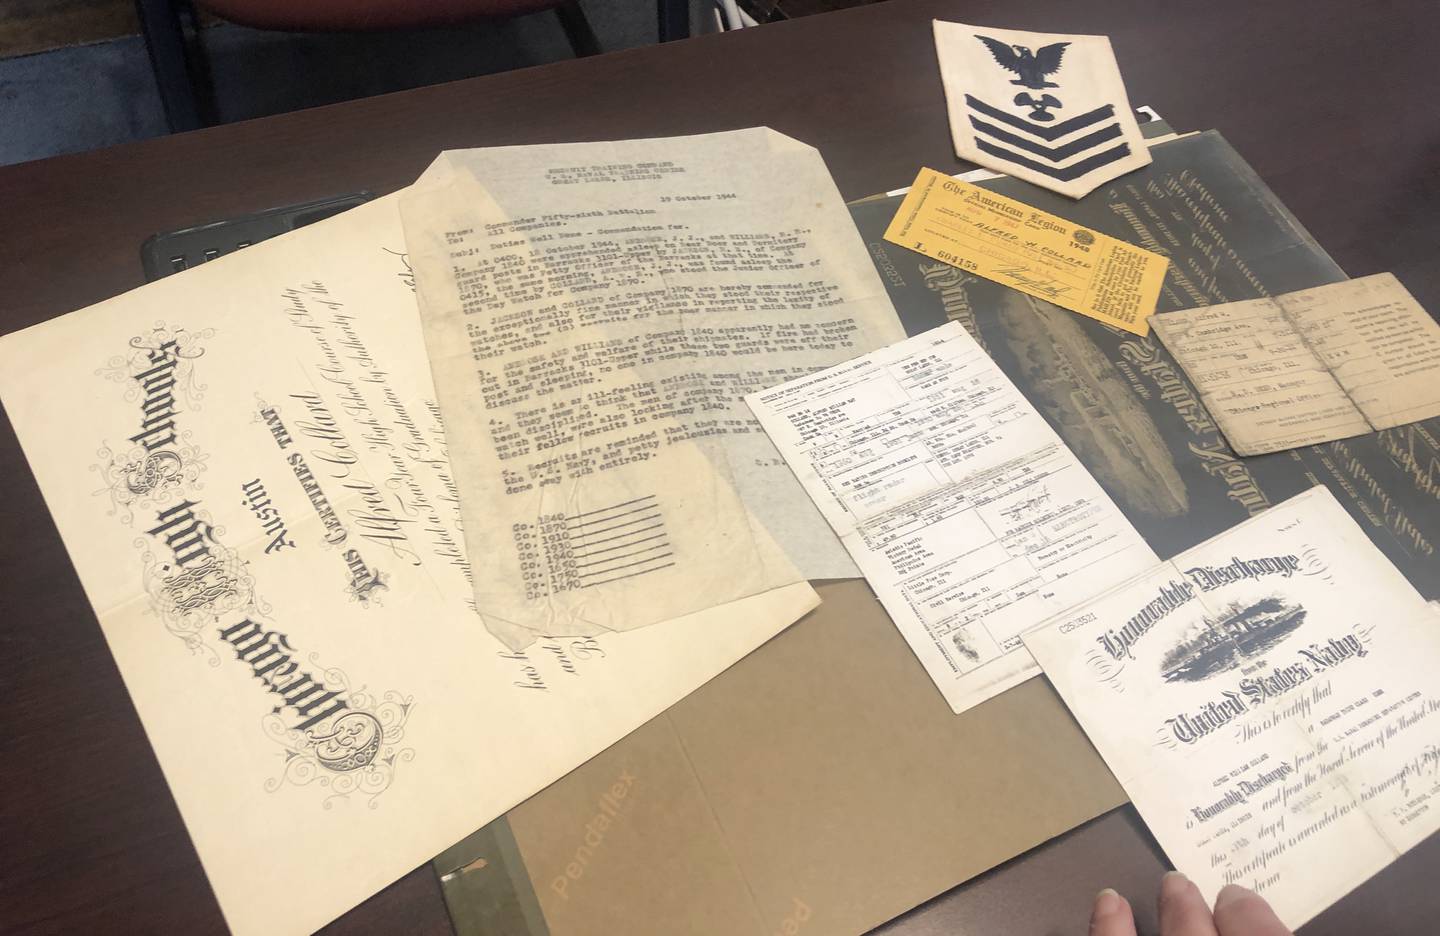 Stacy Heiliger, the new Harvard Parks and Recreation superintendent, is looking for Alfred Collard's family to return his U.S. Navy documents to them, found in a filing cabinet she bought online.